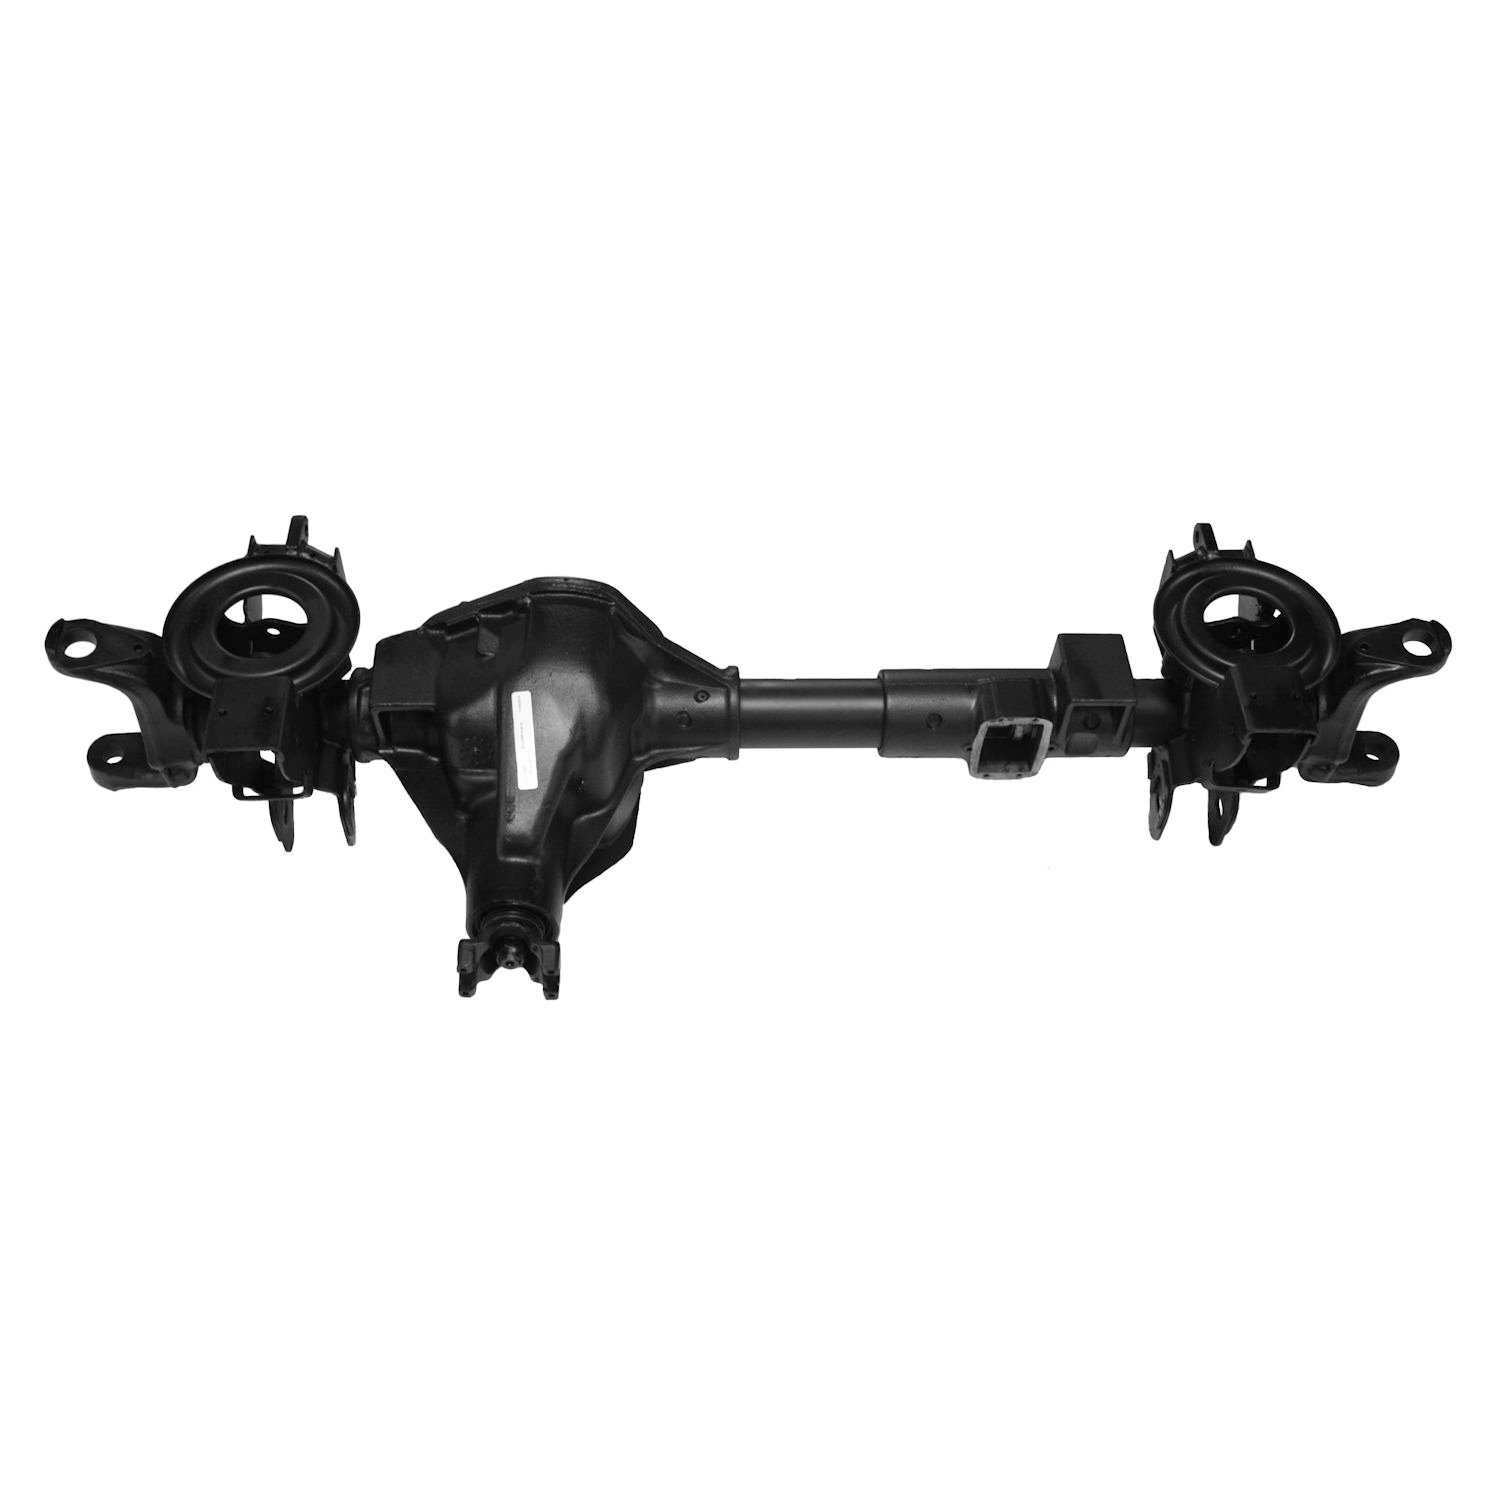 Remanufactured Complete Axle Assy for Dana 60 1998 Ram 2500 & 3500 3.54 with 4 Wheel ABS